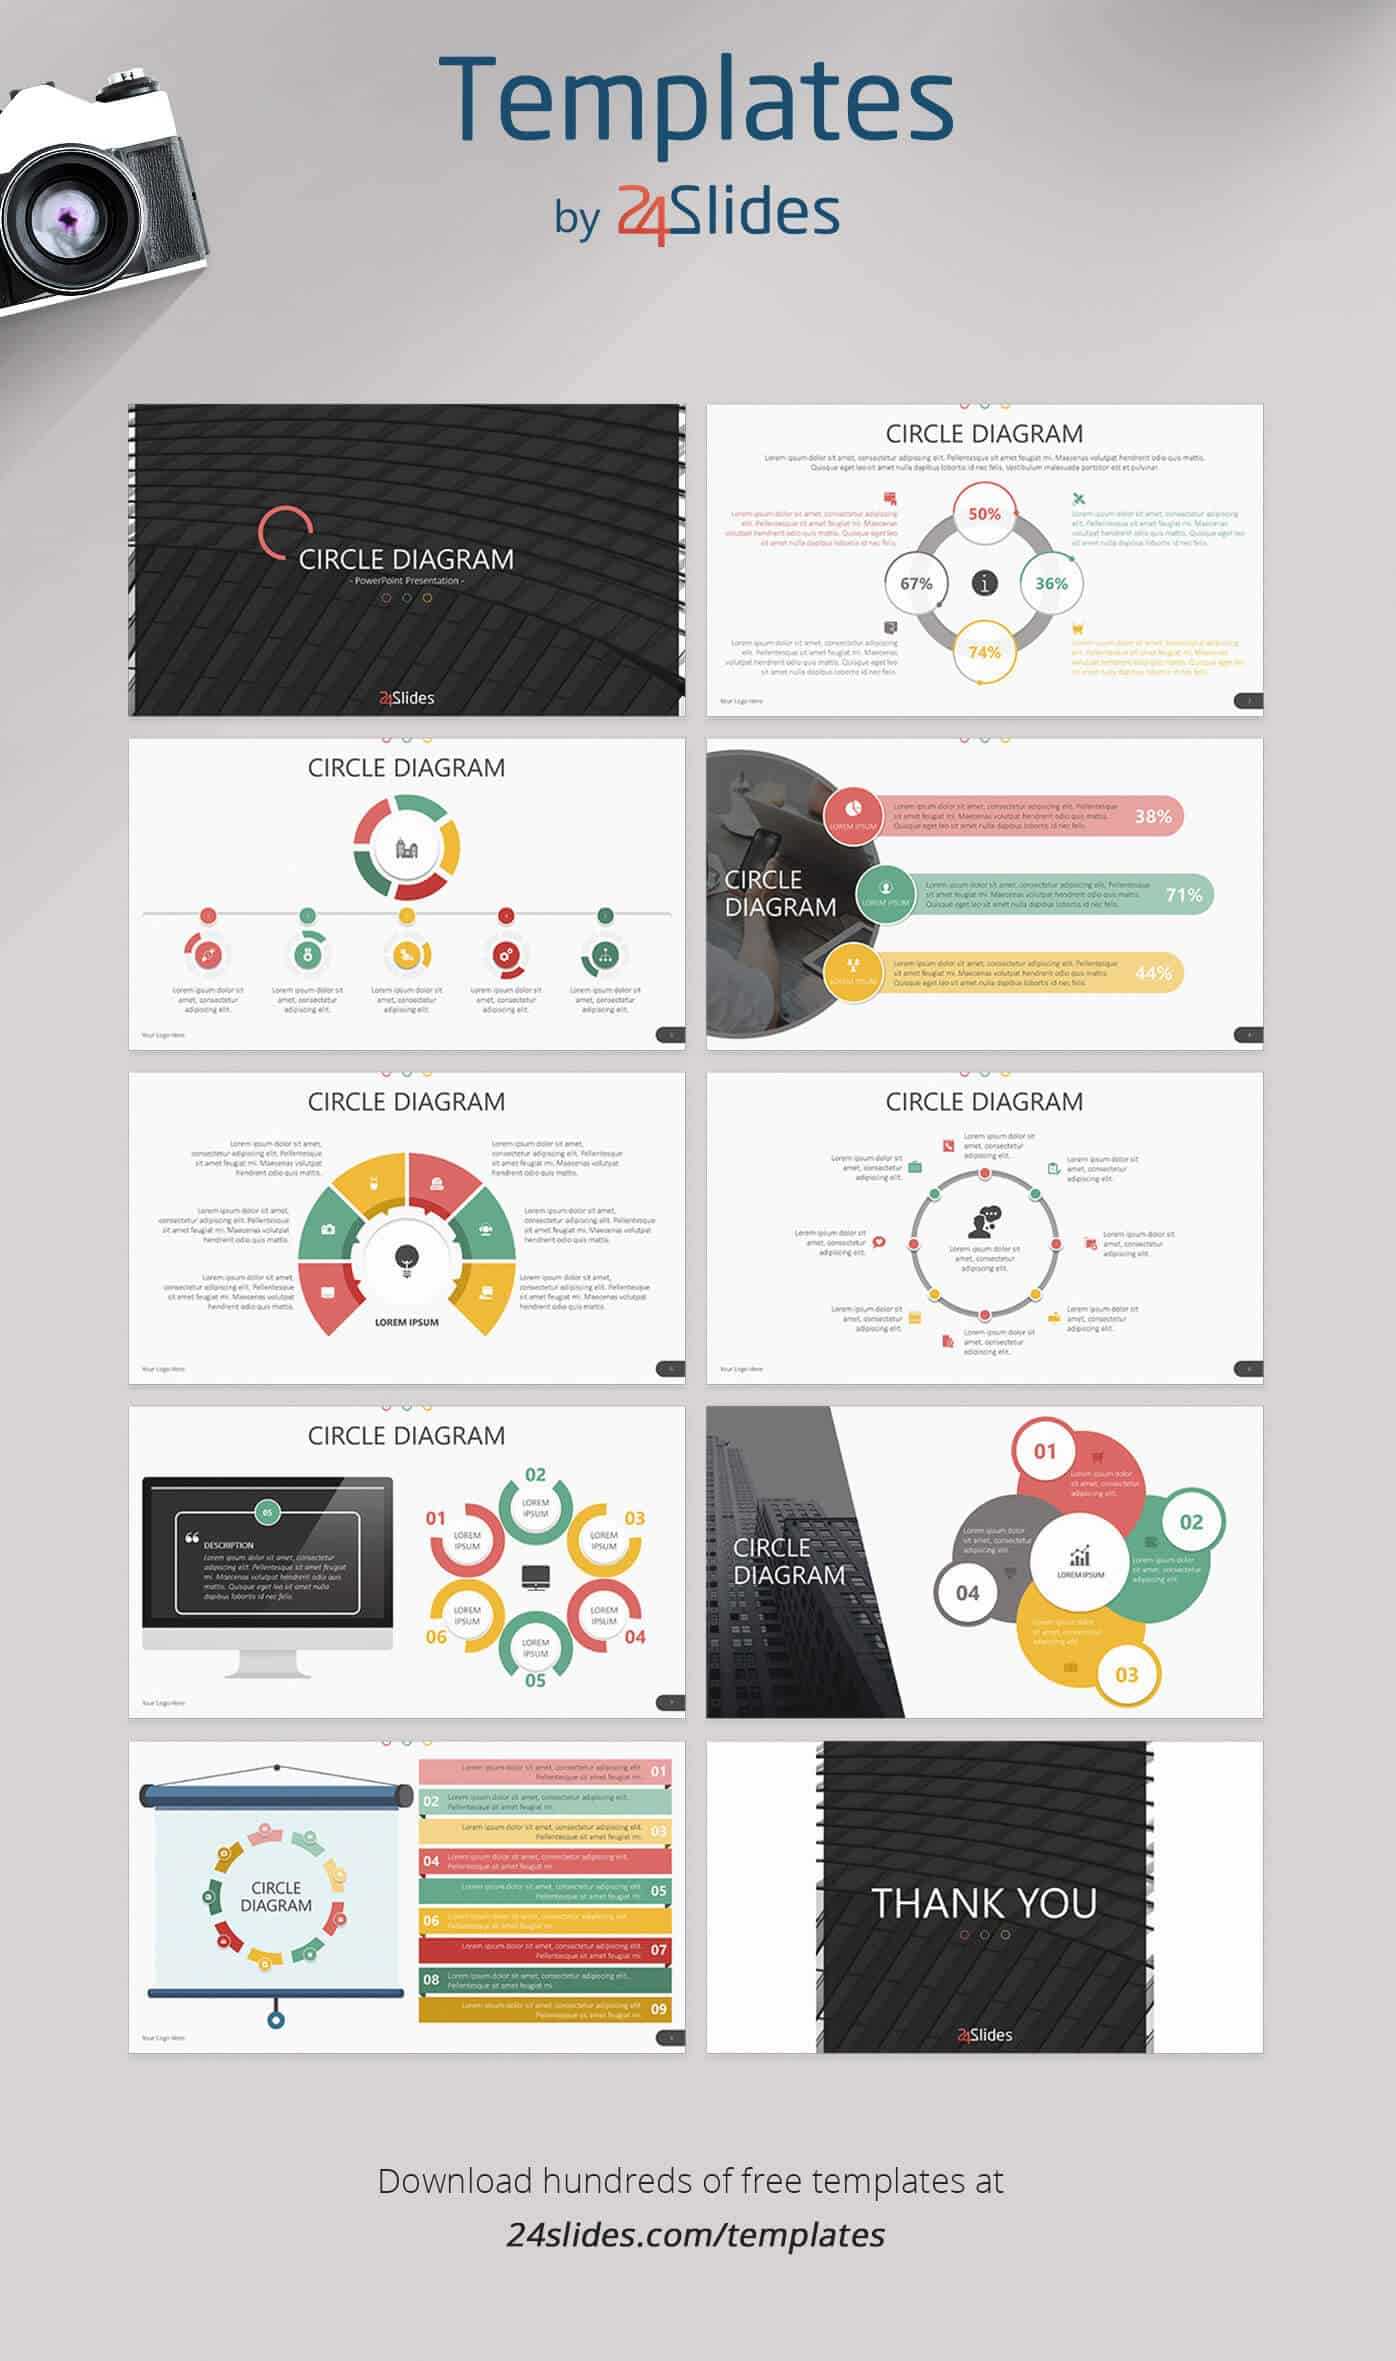 15 Fun And Colorful Free Powerpoint Templates | Present Better Inside Sample Templates For Powerpoint Presentation